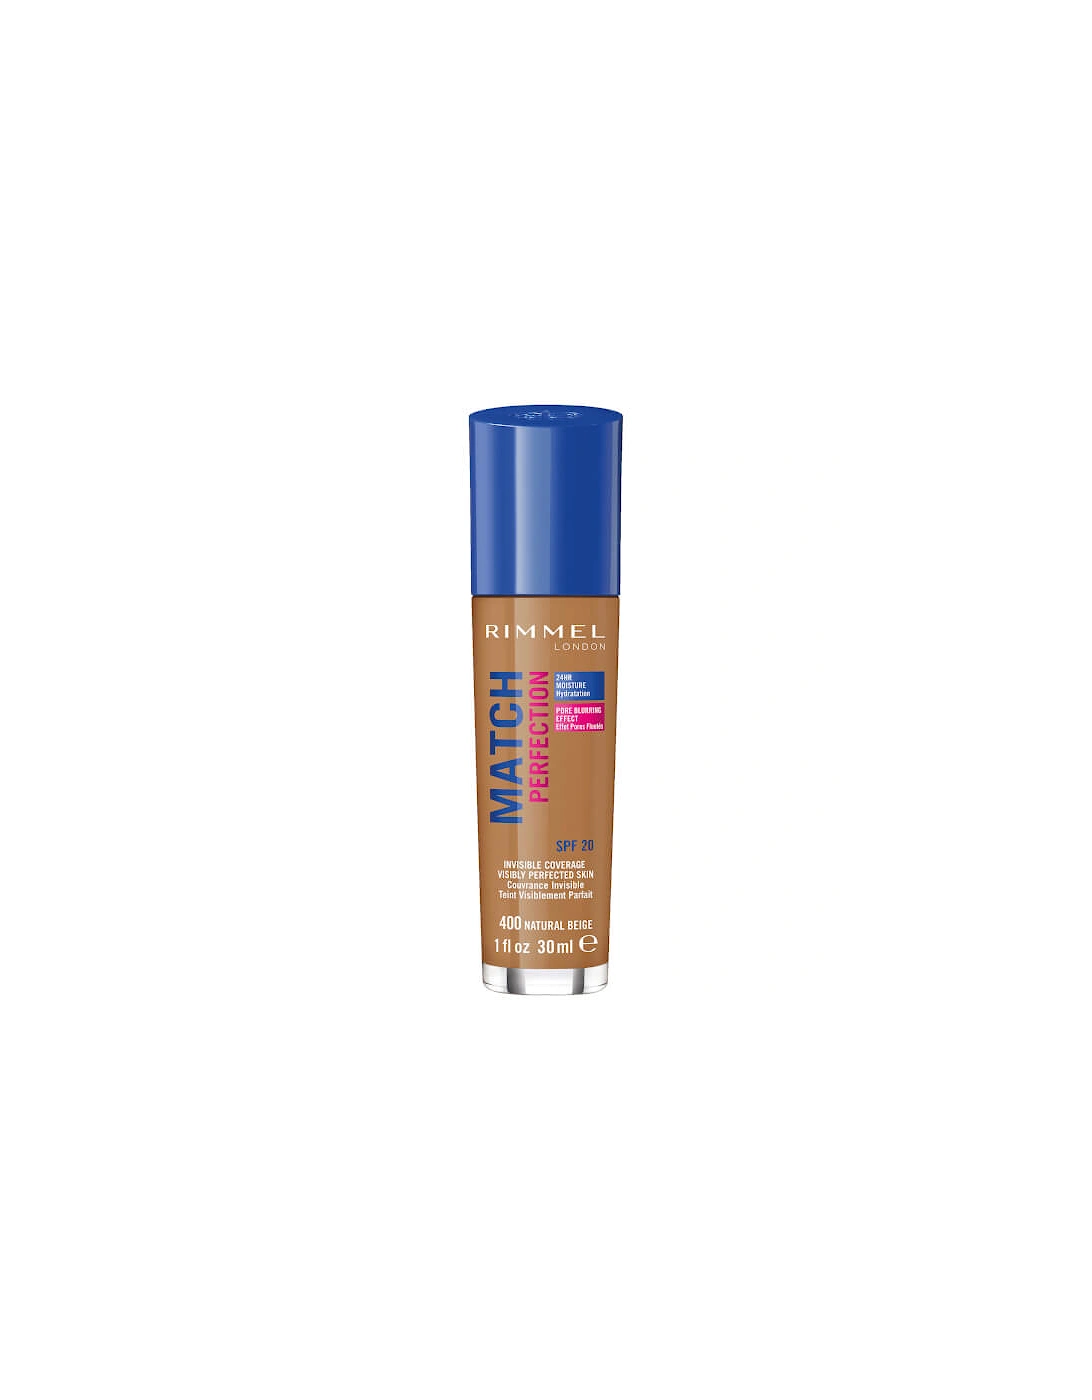 London SPF 20 Match Perfection Foundation - Natural Beige, 2 of 1